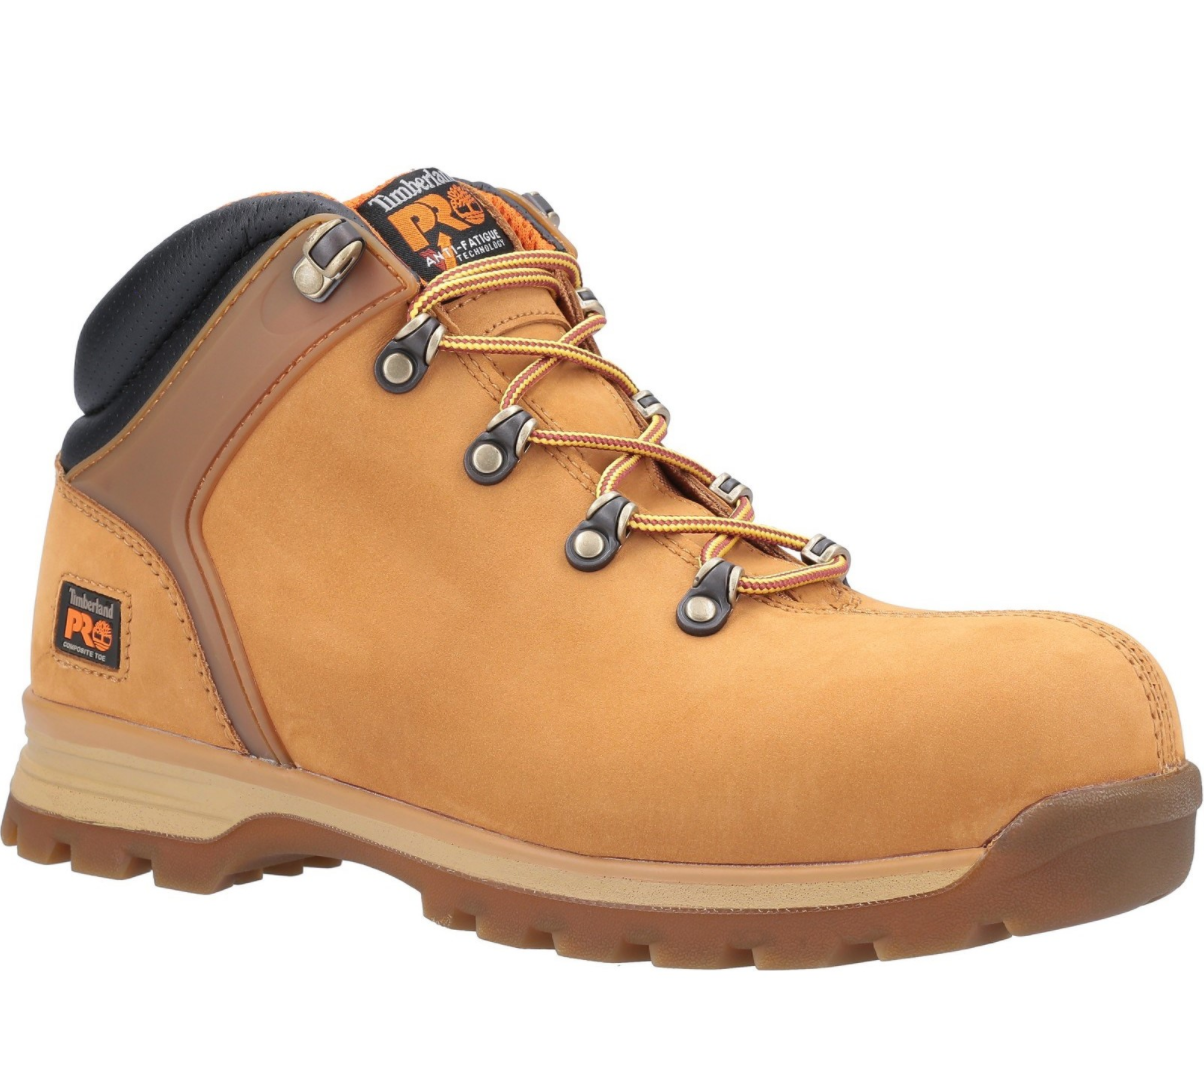 Timberland S3 SPLITROCK XT WITH COMPOSITE SAFETY TOE